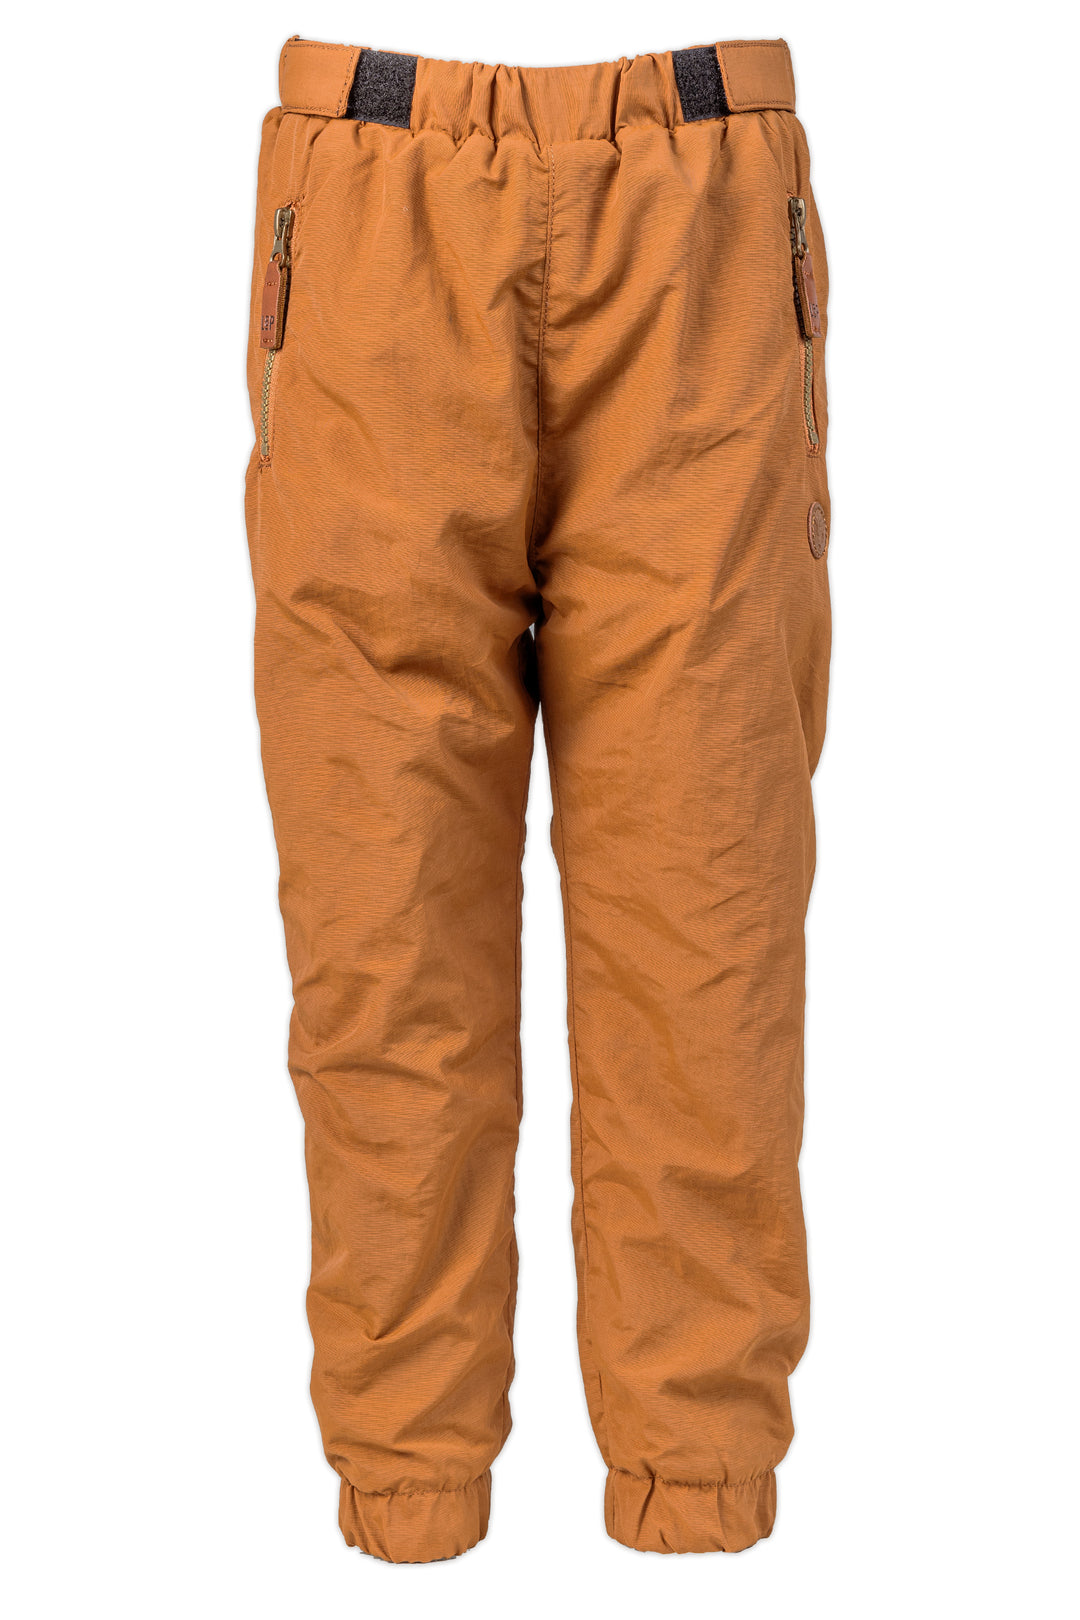 Cotton Lined Outdoor Pants [224] [Junior]